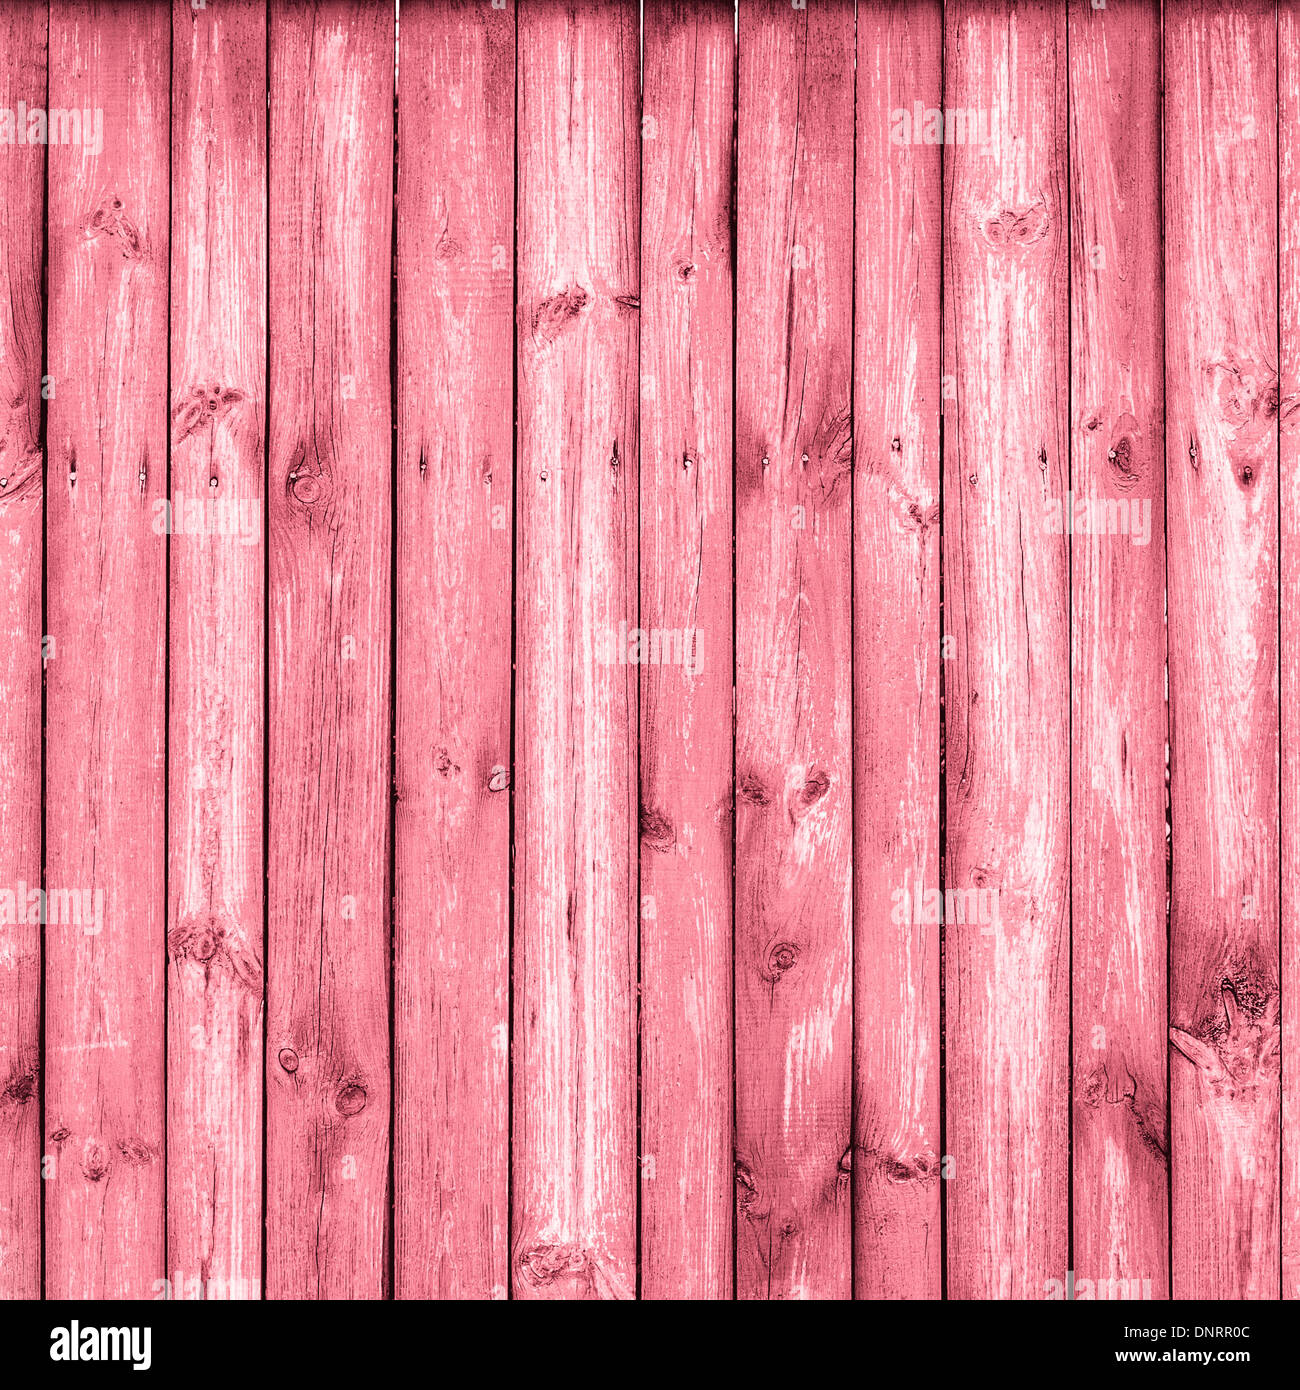 The Pink Grunge Wood Texture With Natural Patterns. Surface Of Old Wood Paint Over. Stock Photo